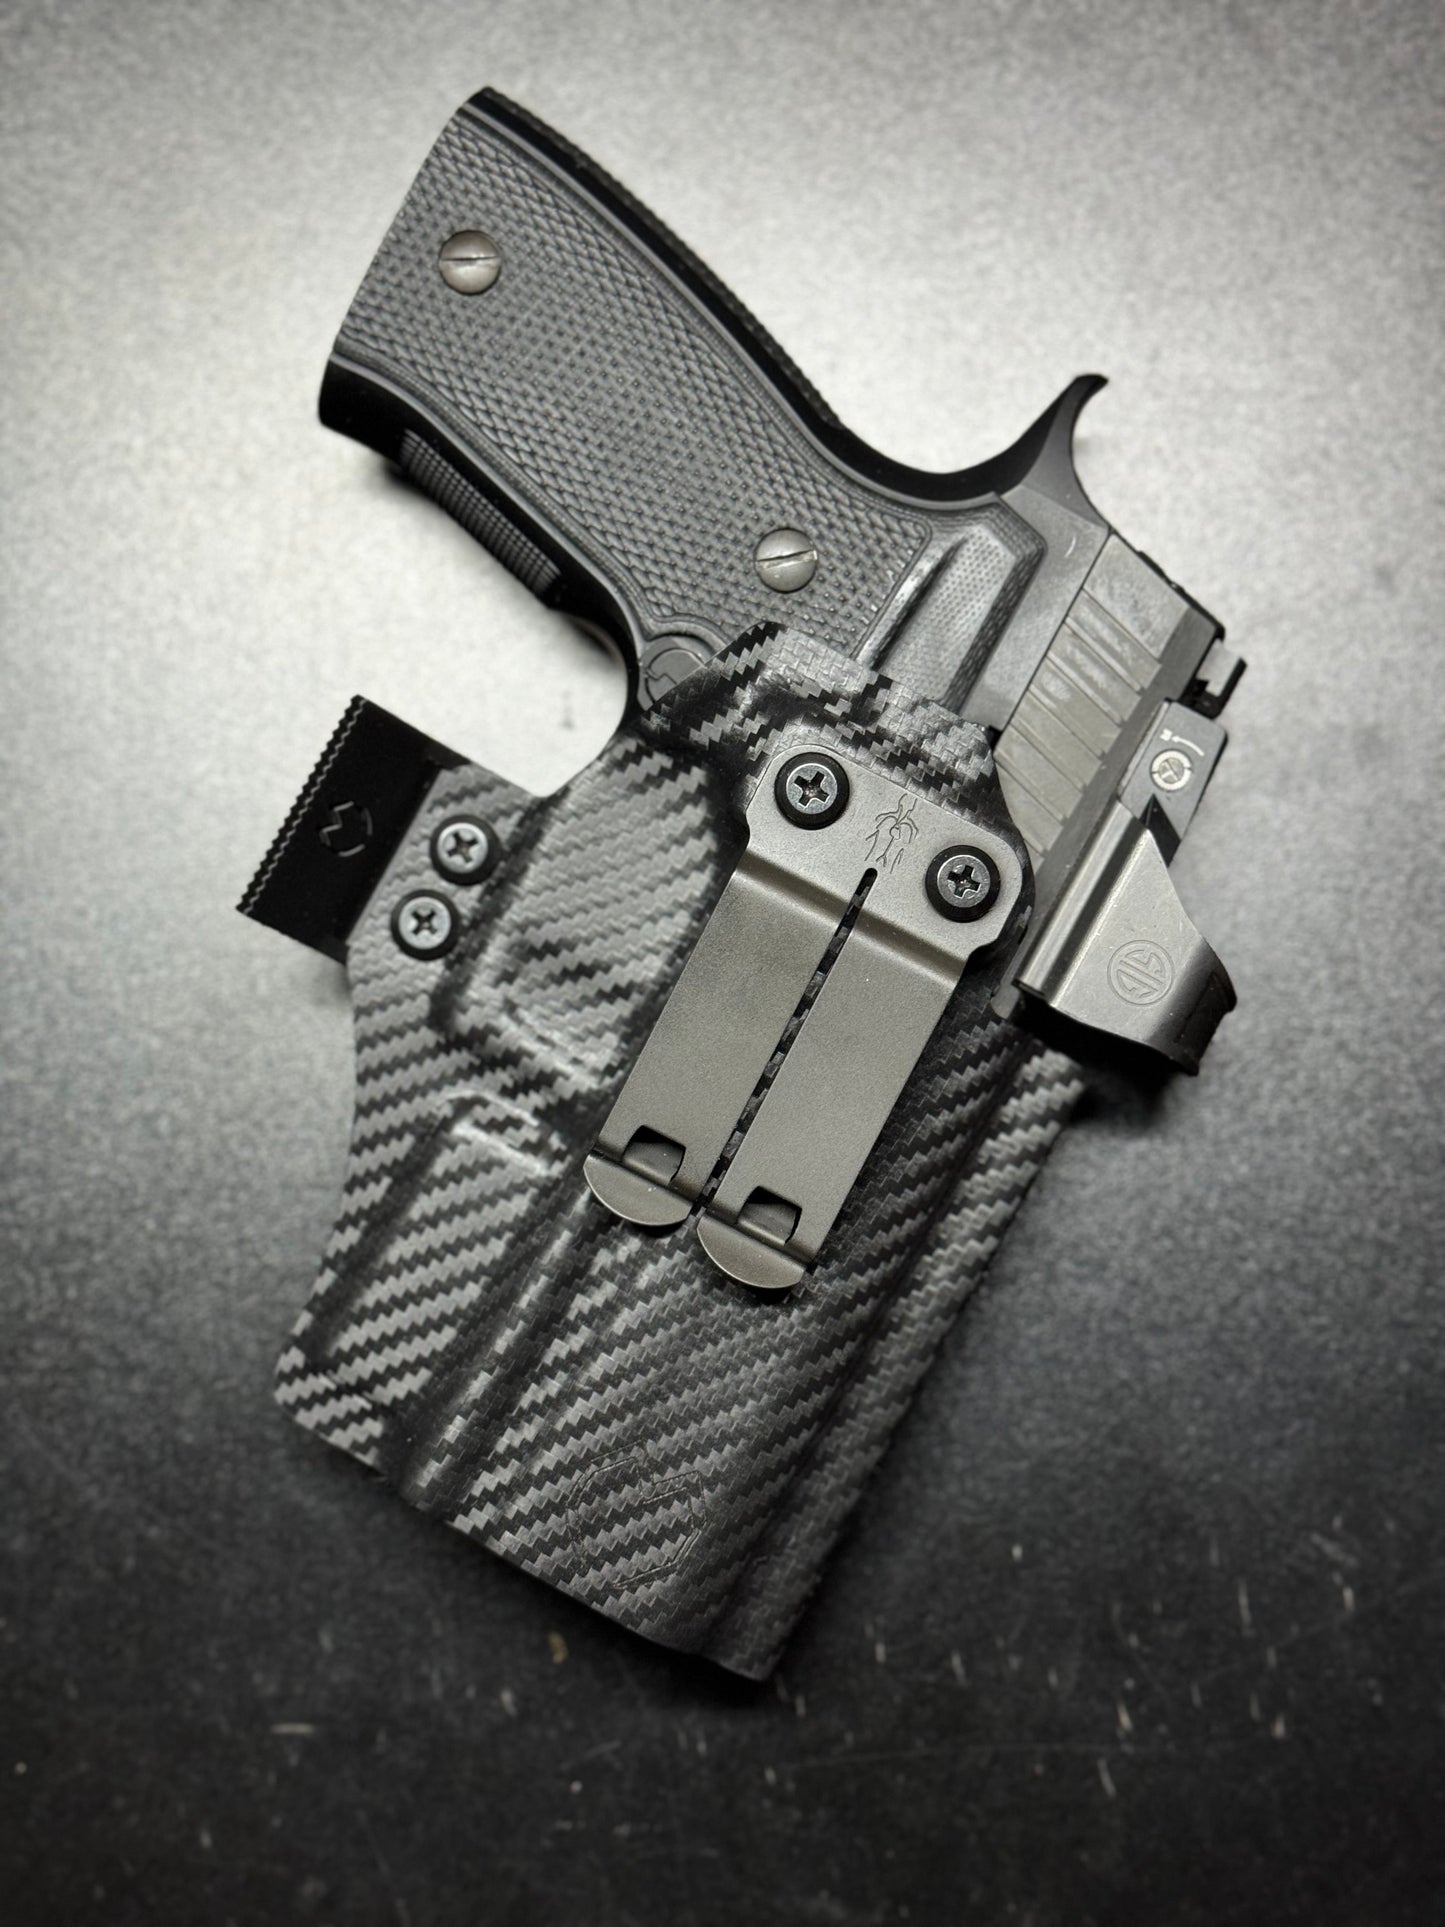 High Quality Kydex Holster, Standard Kydex Holster, Inside the waistband holster, Smith and Wesson Holster